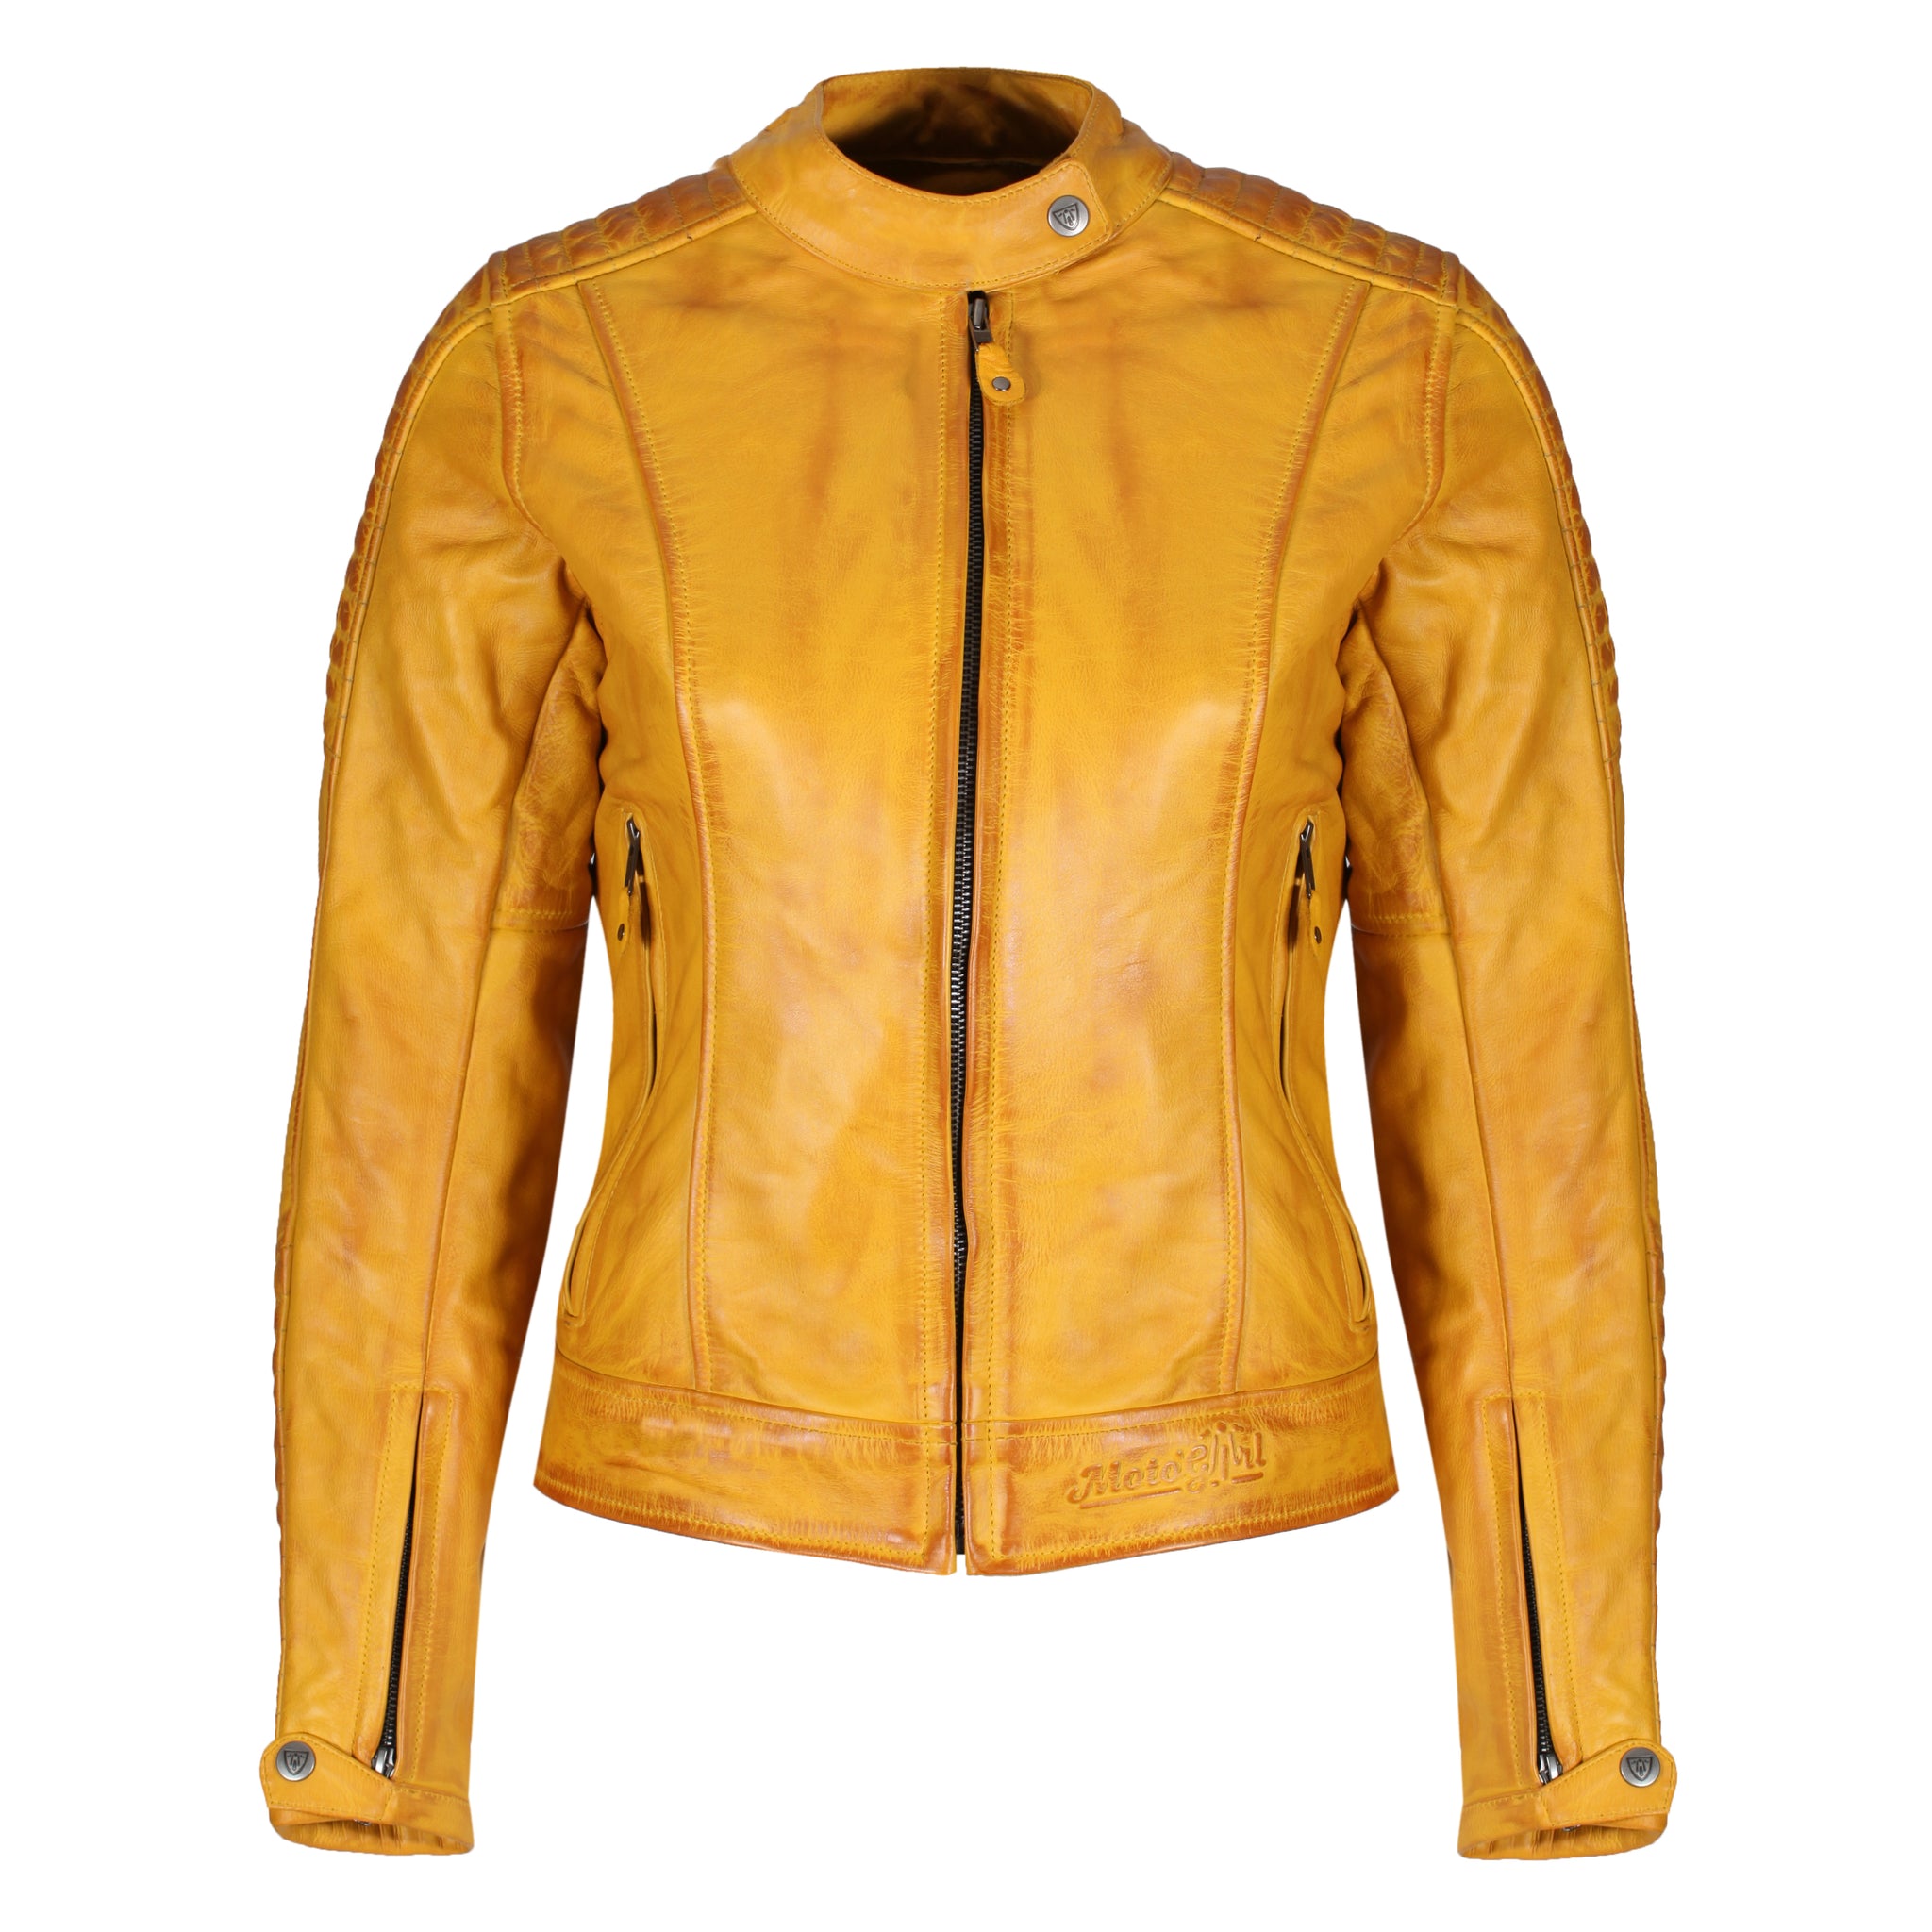 Yellow Valerie motorcycle leather jacket from Moto Girl